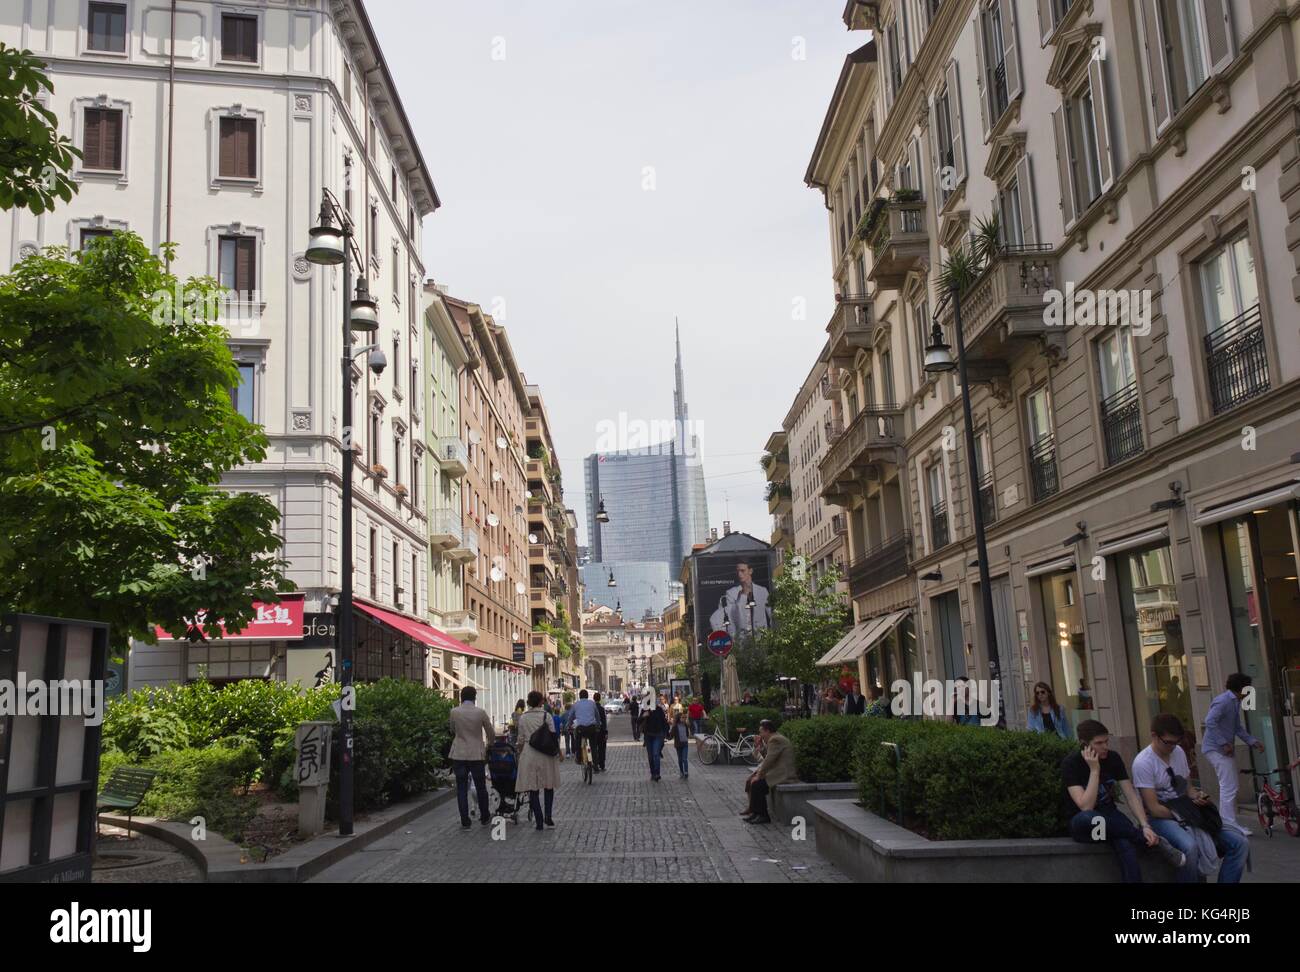 MILAN, ITALY - MAY 10: Corso Garibaldi in Milan, one of the main shopping street, overlooking the ancient Arch of Porta Nuova and the new glass skyscr Stock Photo